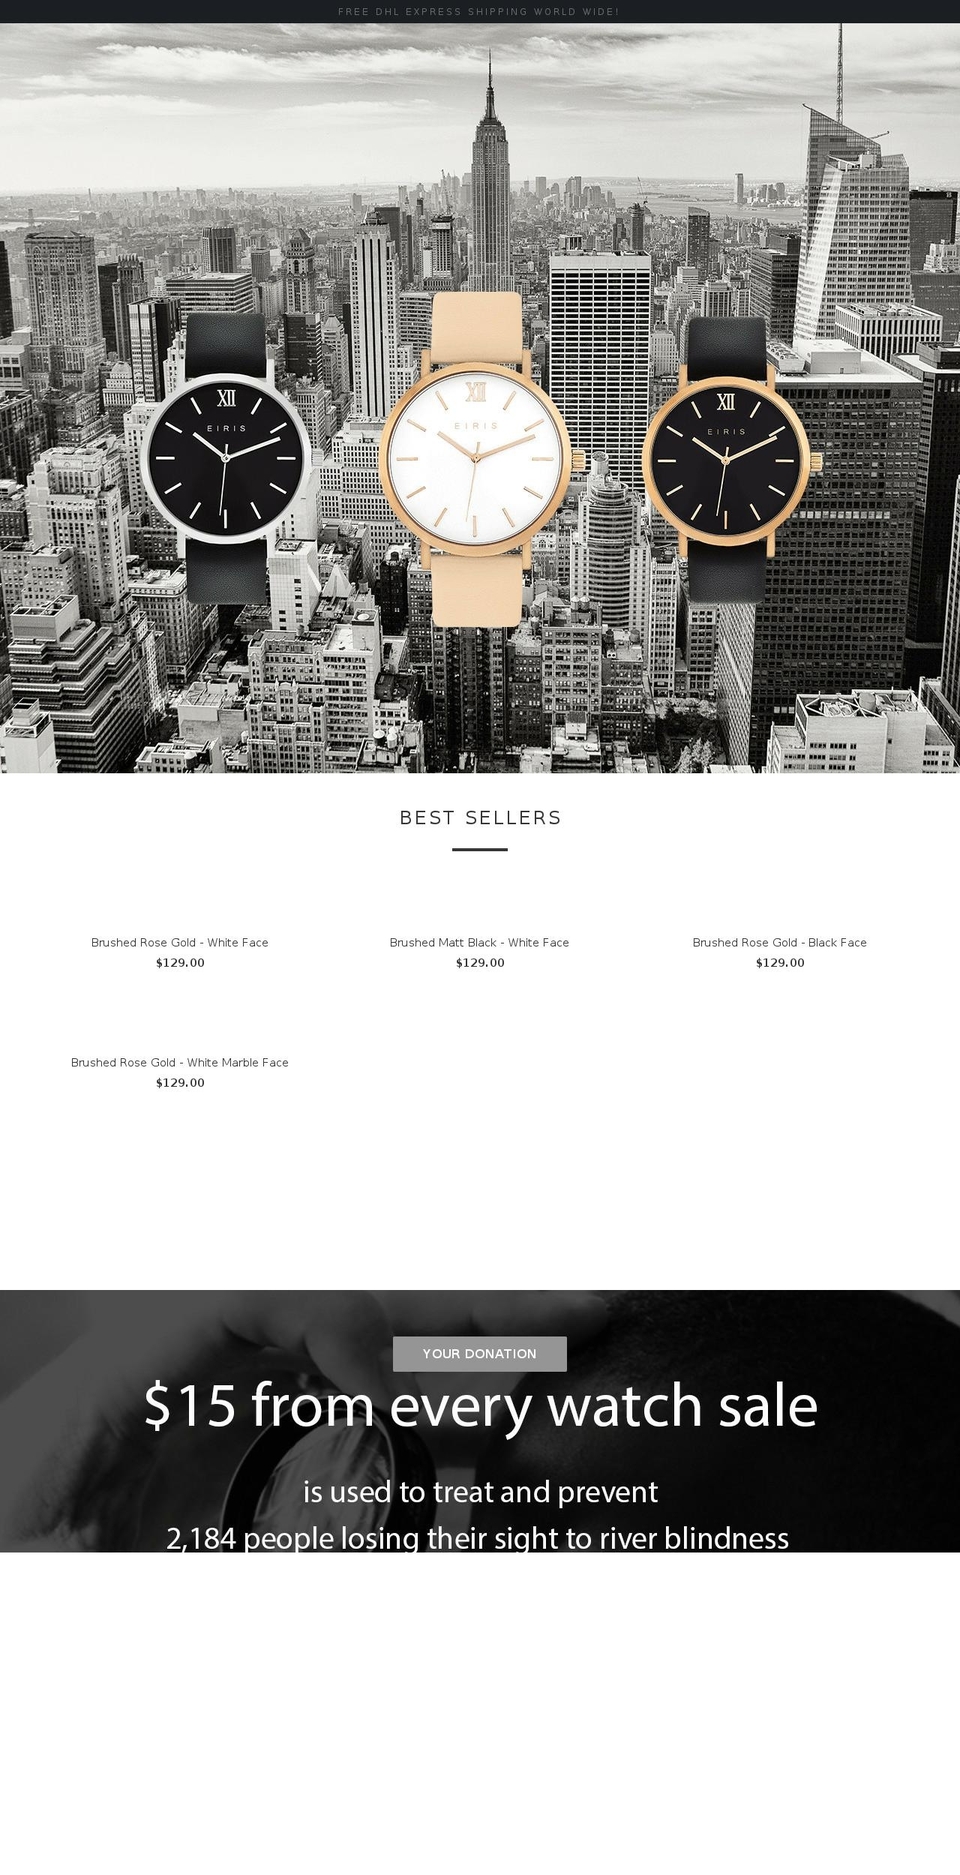 WATCHES Shopify theme site example eiriswatches.com